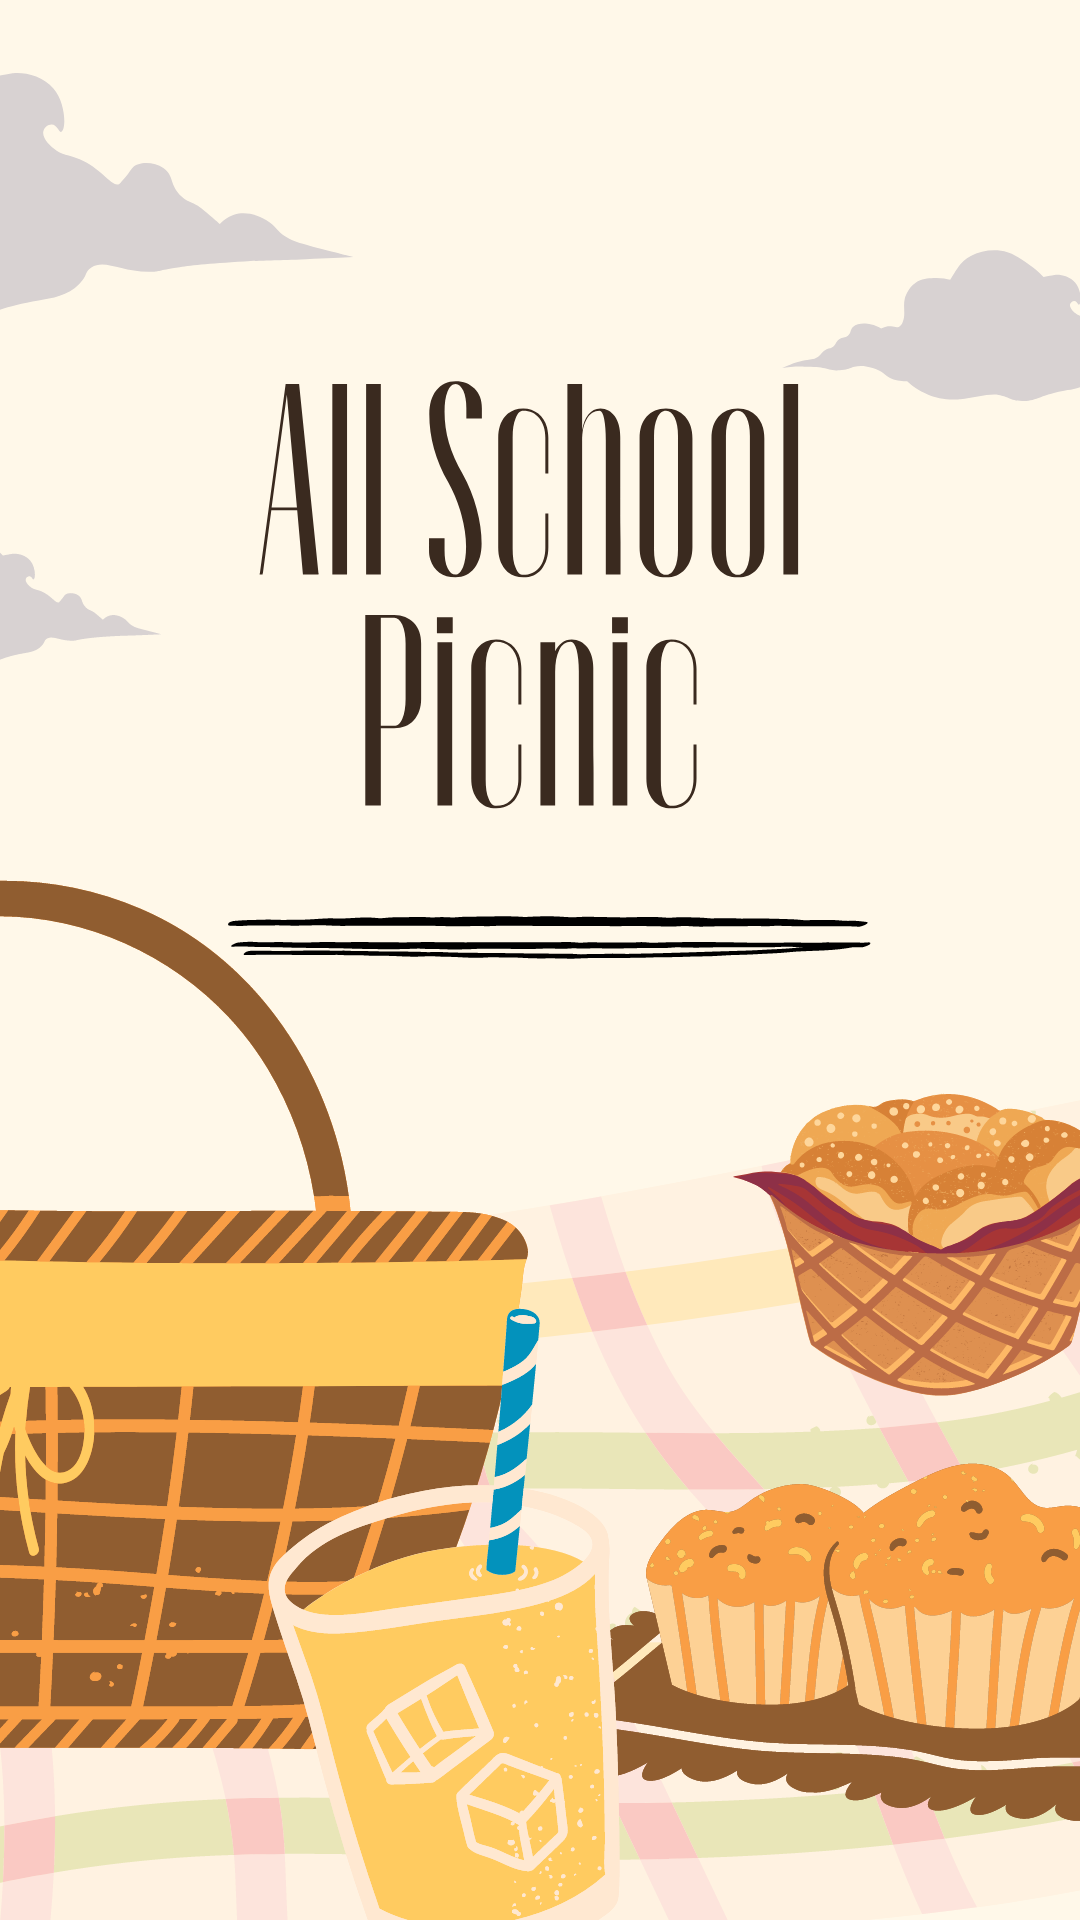 Picnic basket on a blanket with a drink and muffins,